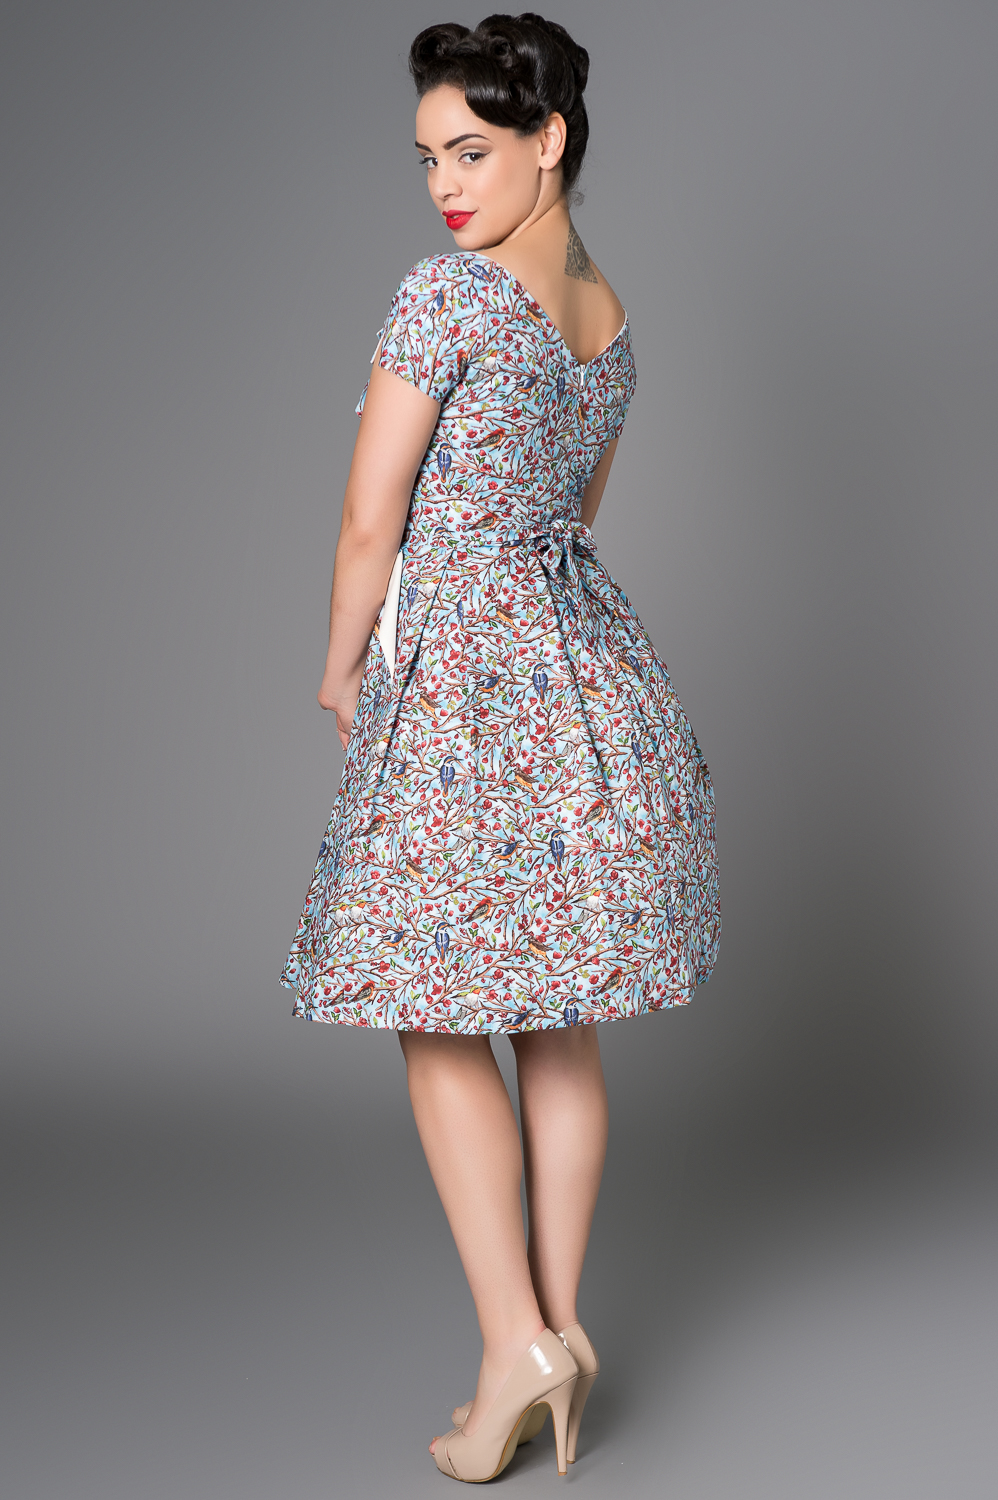 Classic vintage occasional dress with pockets and pleated skirt